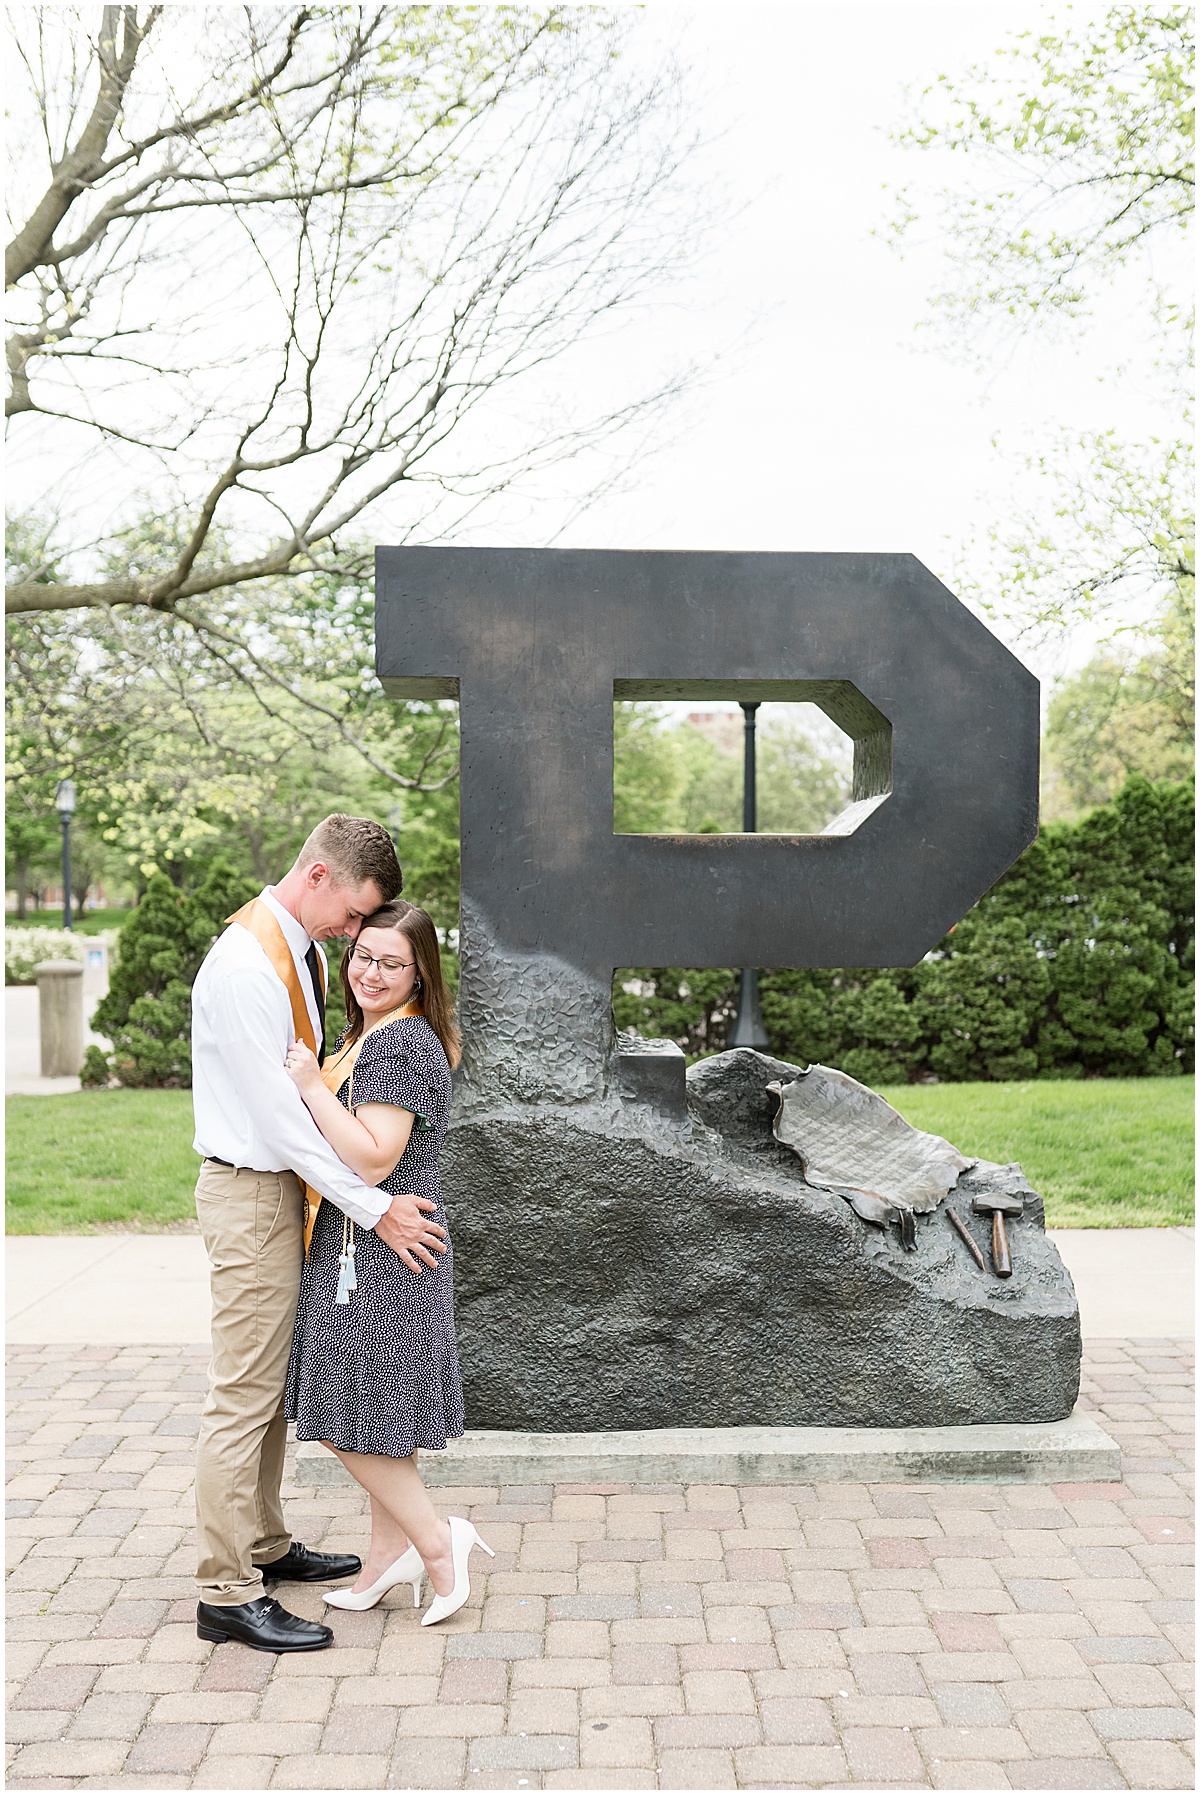 Couple hug with graduation tassles during graduation photos at Purdue University in front of the Purdue Memorial Union